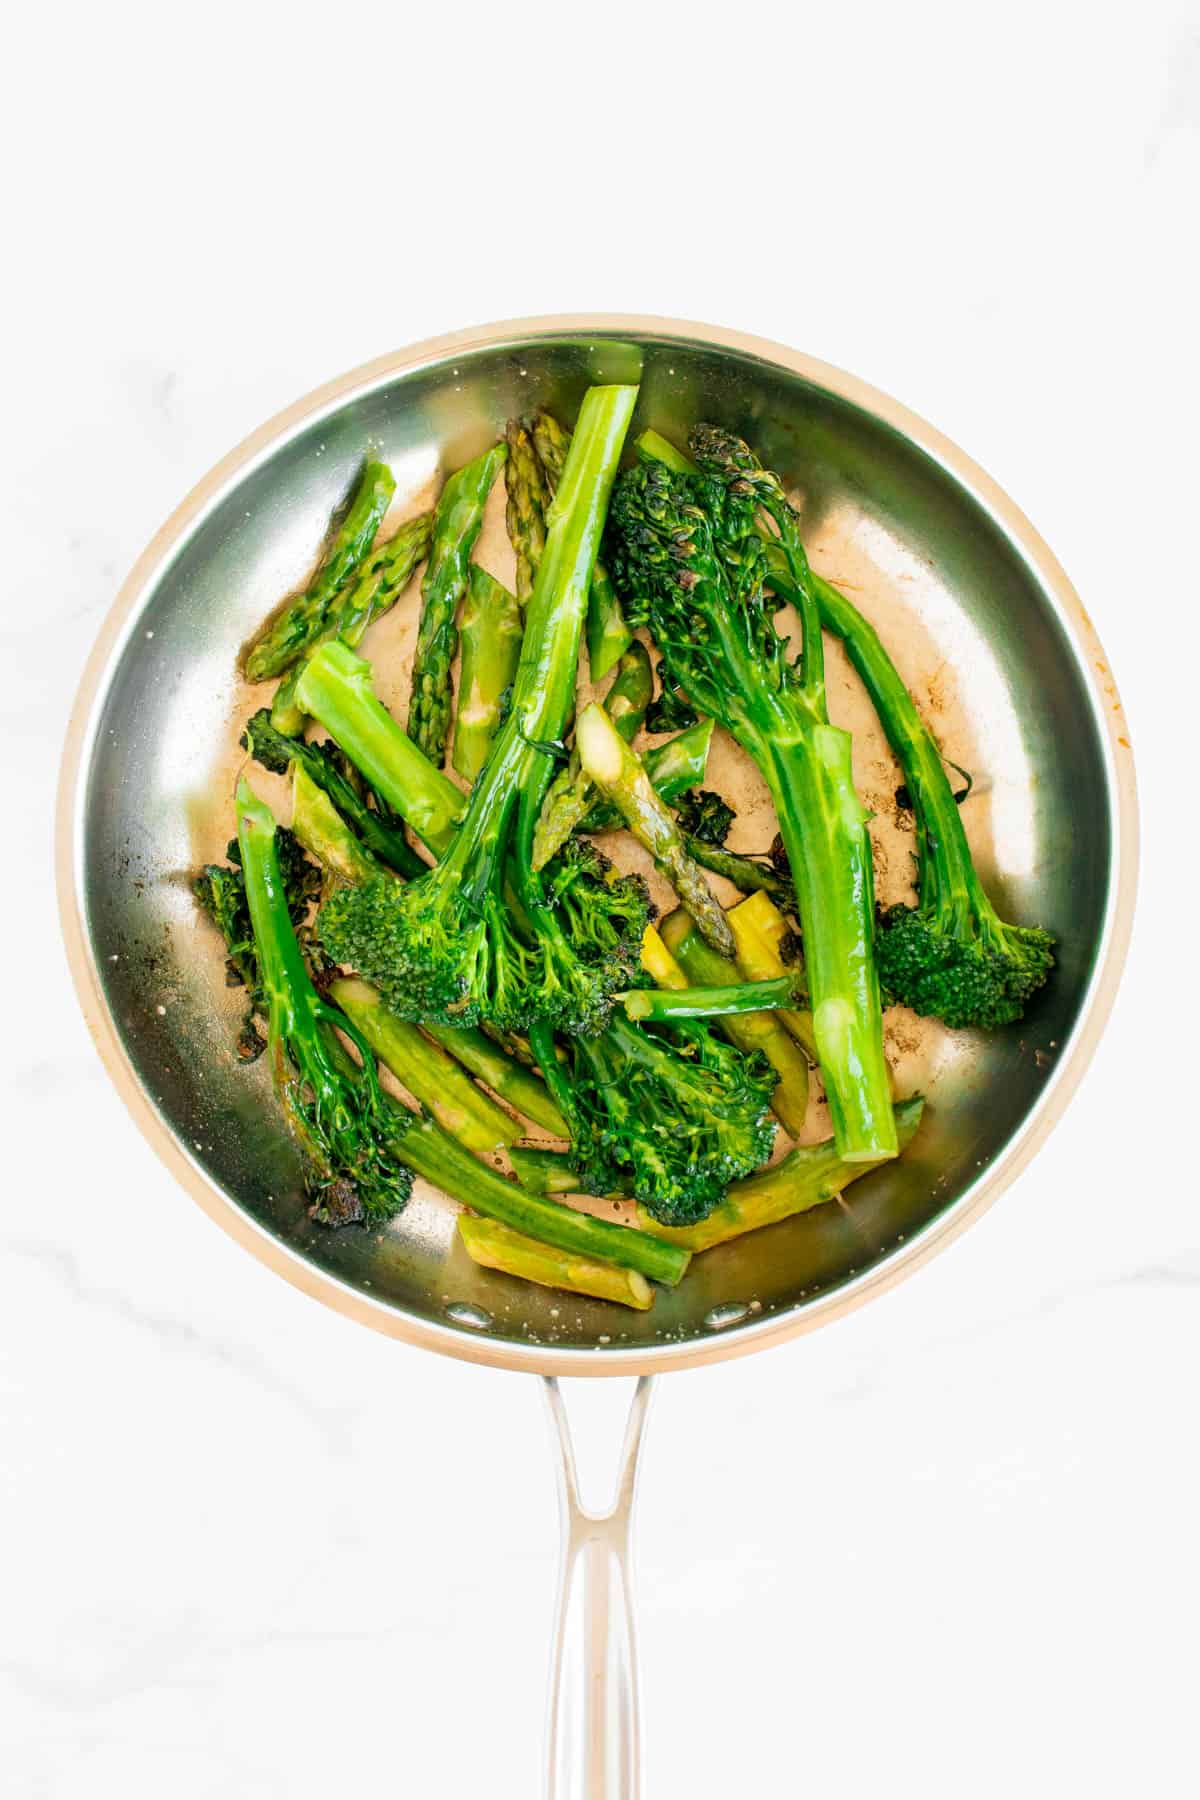 Asparagus and broccolini are in a silver skillet, and have been cooked.